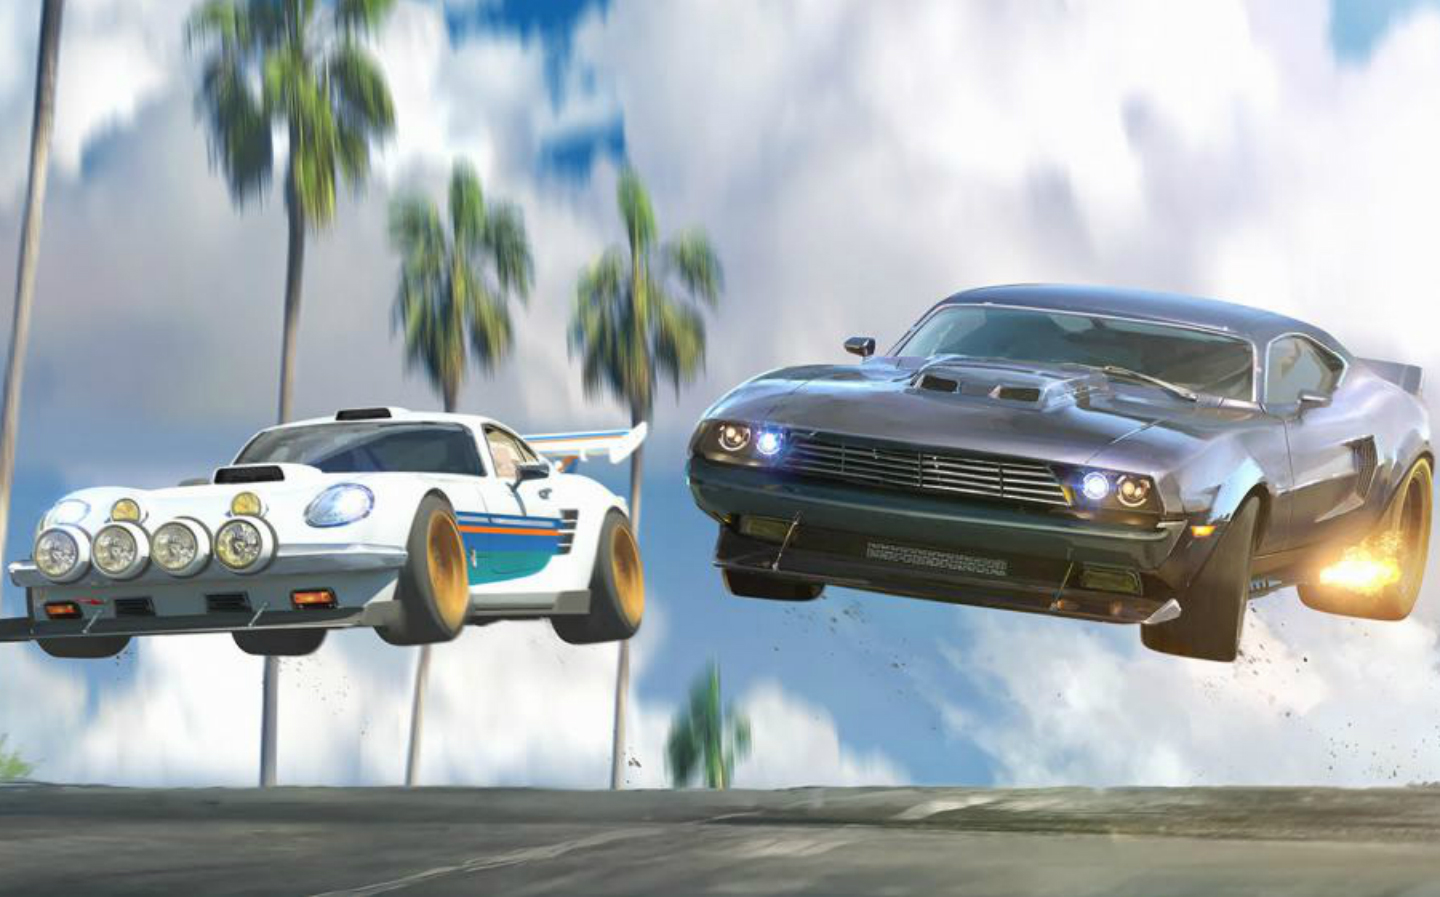 DreamWorks and Netflix launch Fast & Furious animated series